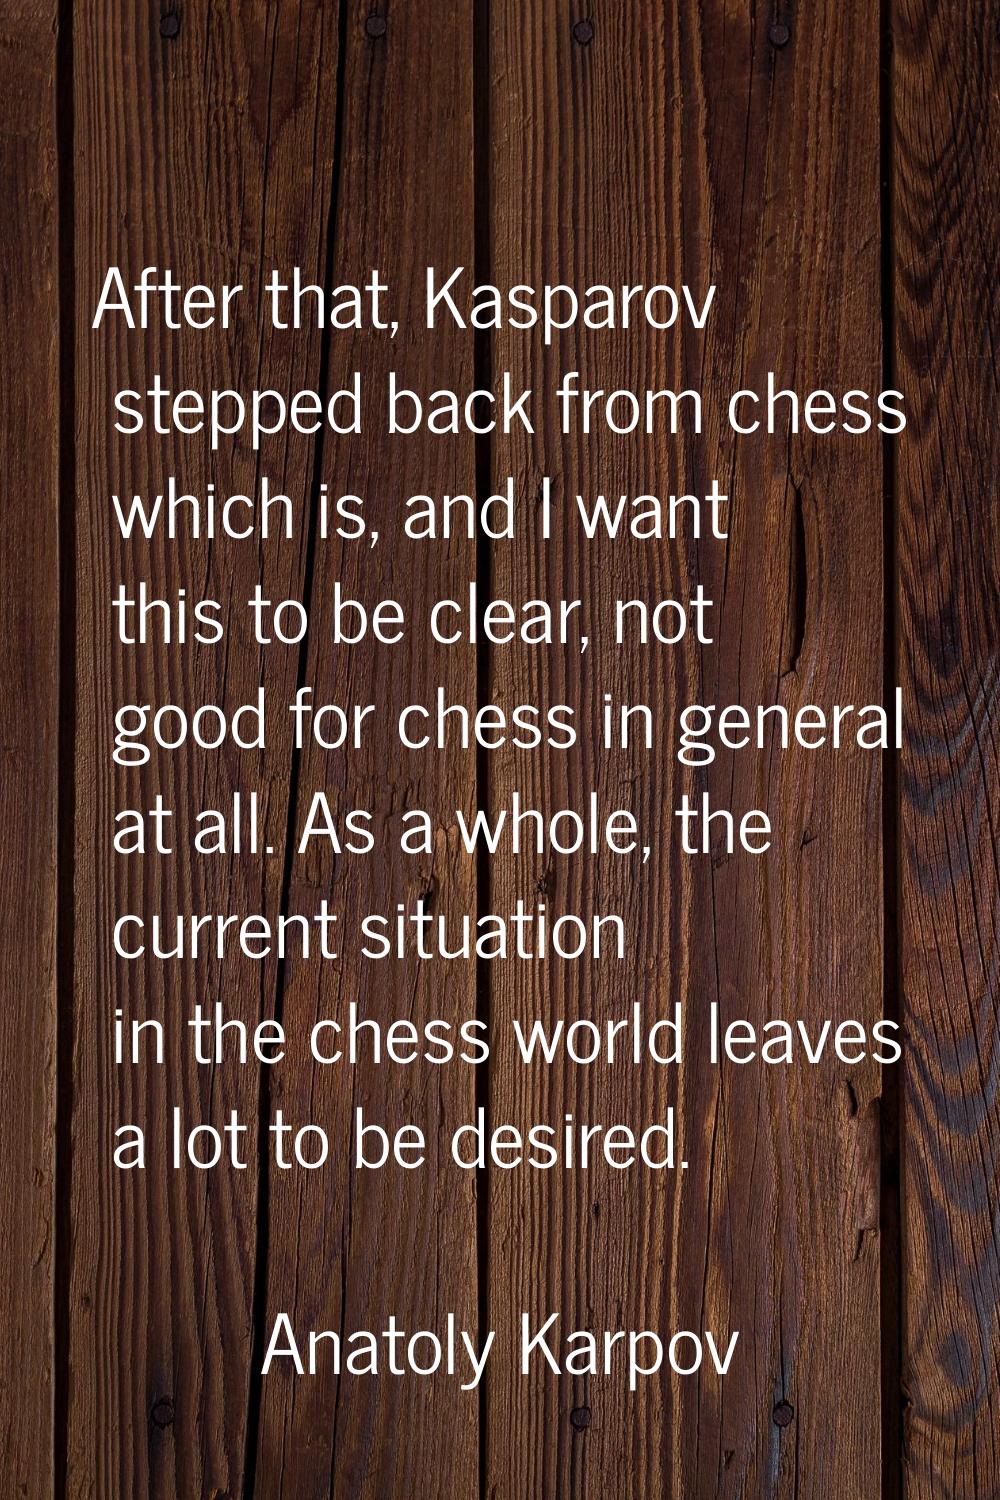 After that, Kasparov stepped back from chess which is, and I want this to be clear, not good for ch